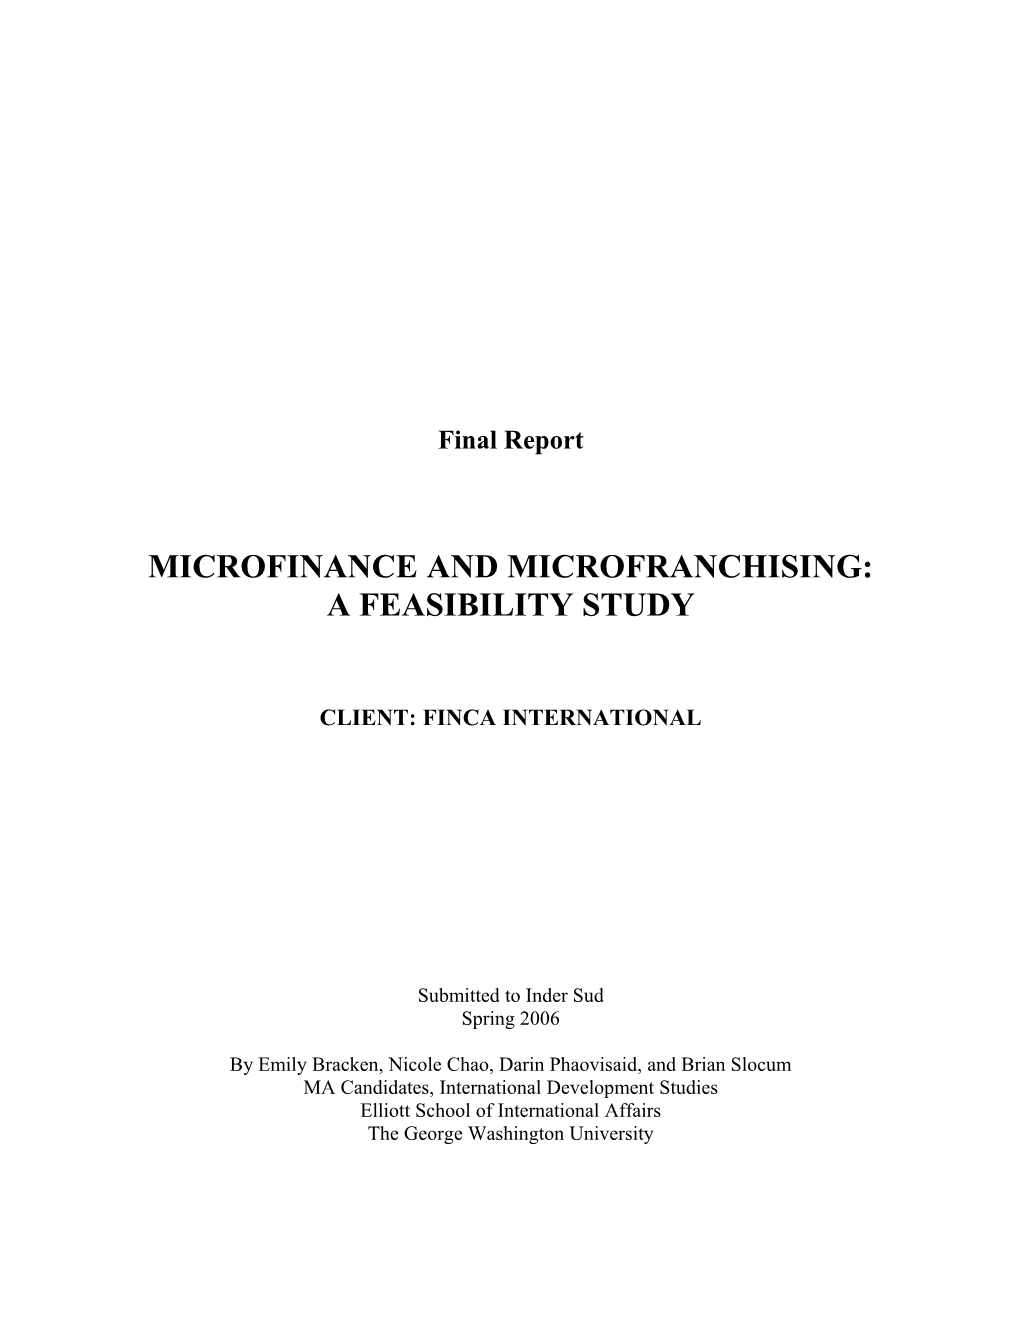 Microfinance and Microfranchising: a Feasibility Study